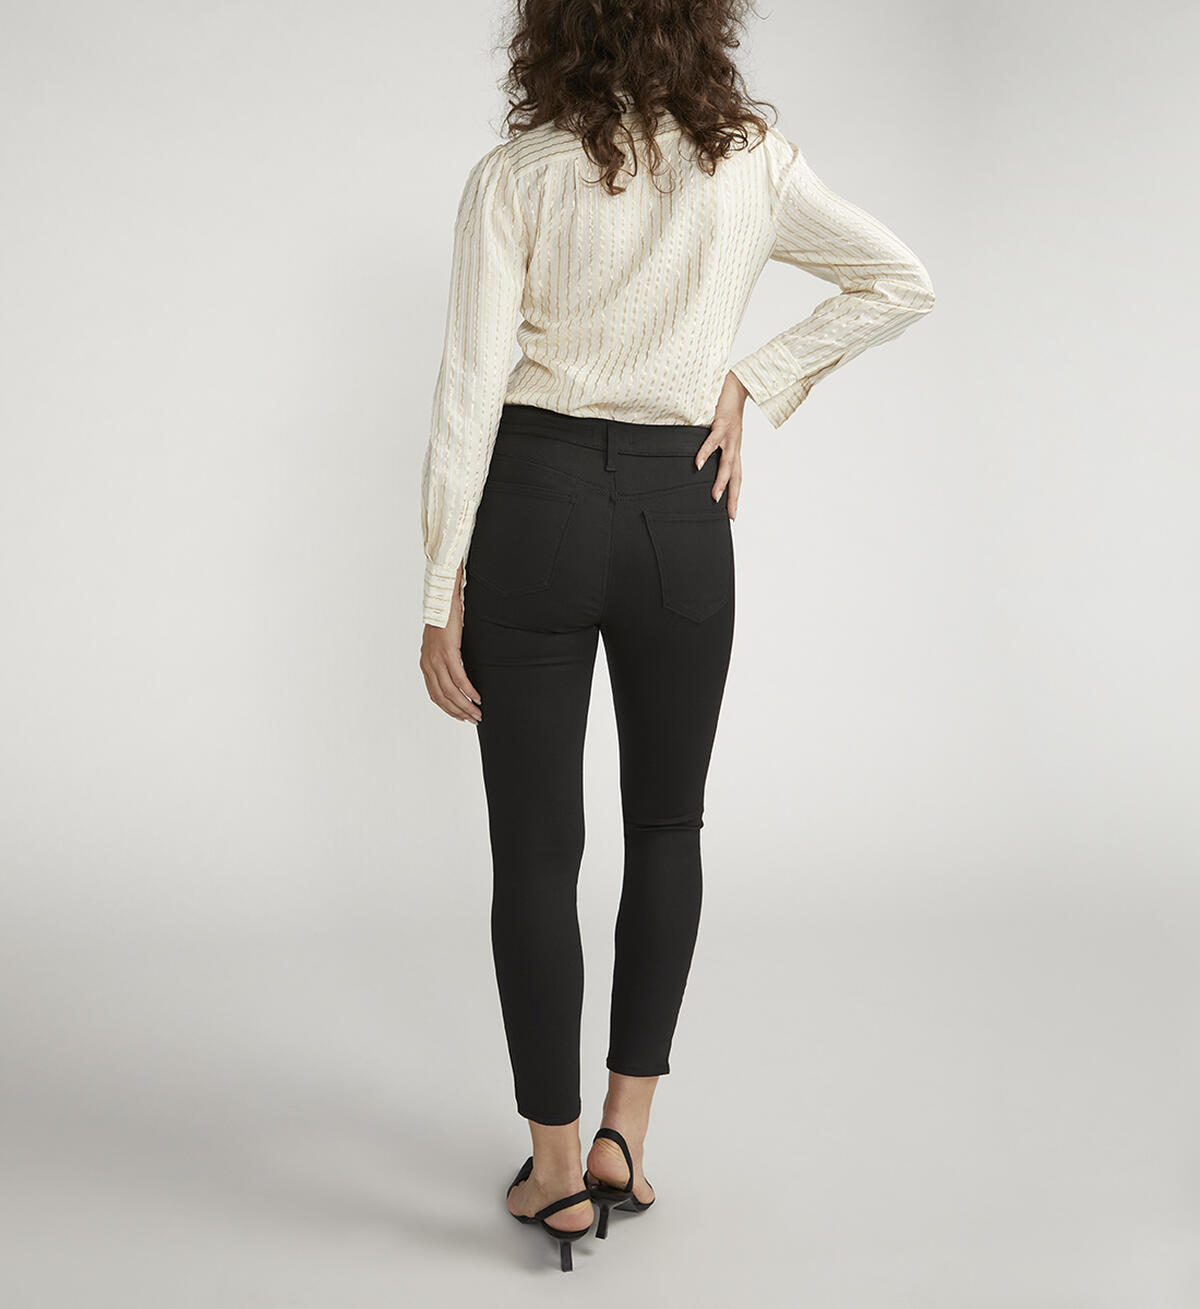 Suki Mid Rise Skinny Ankle Jeans, , hi-res image number 1